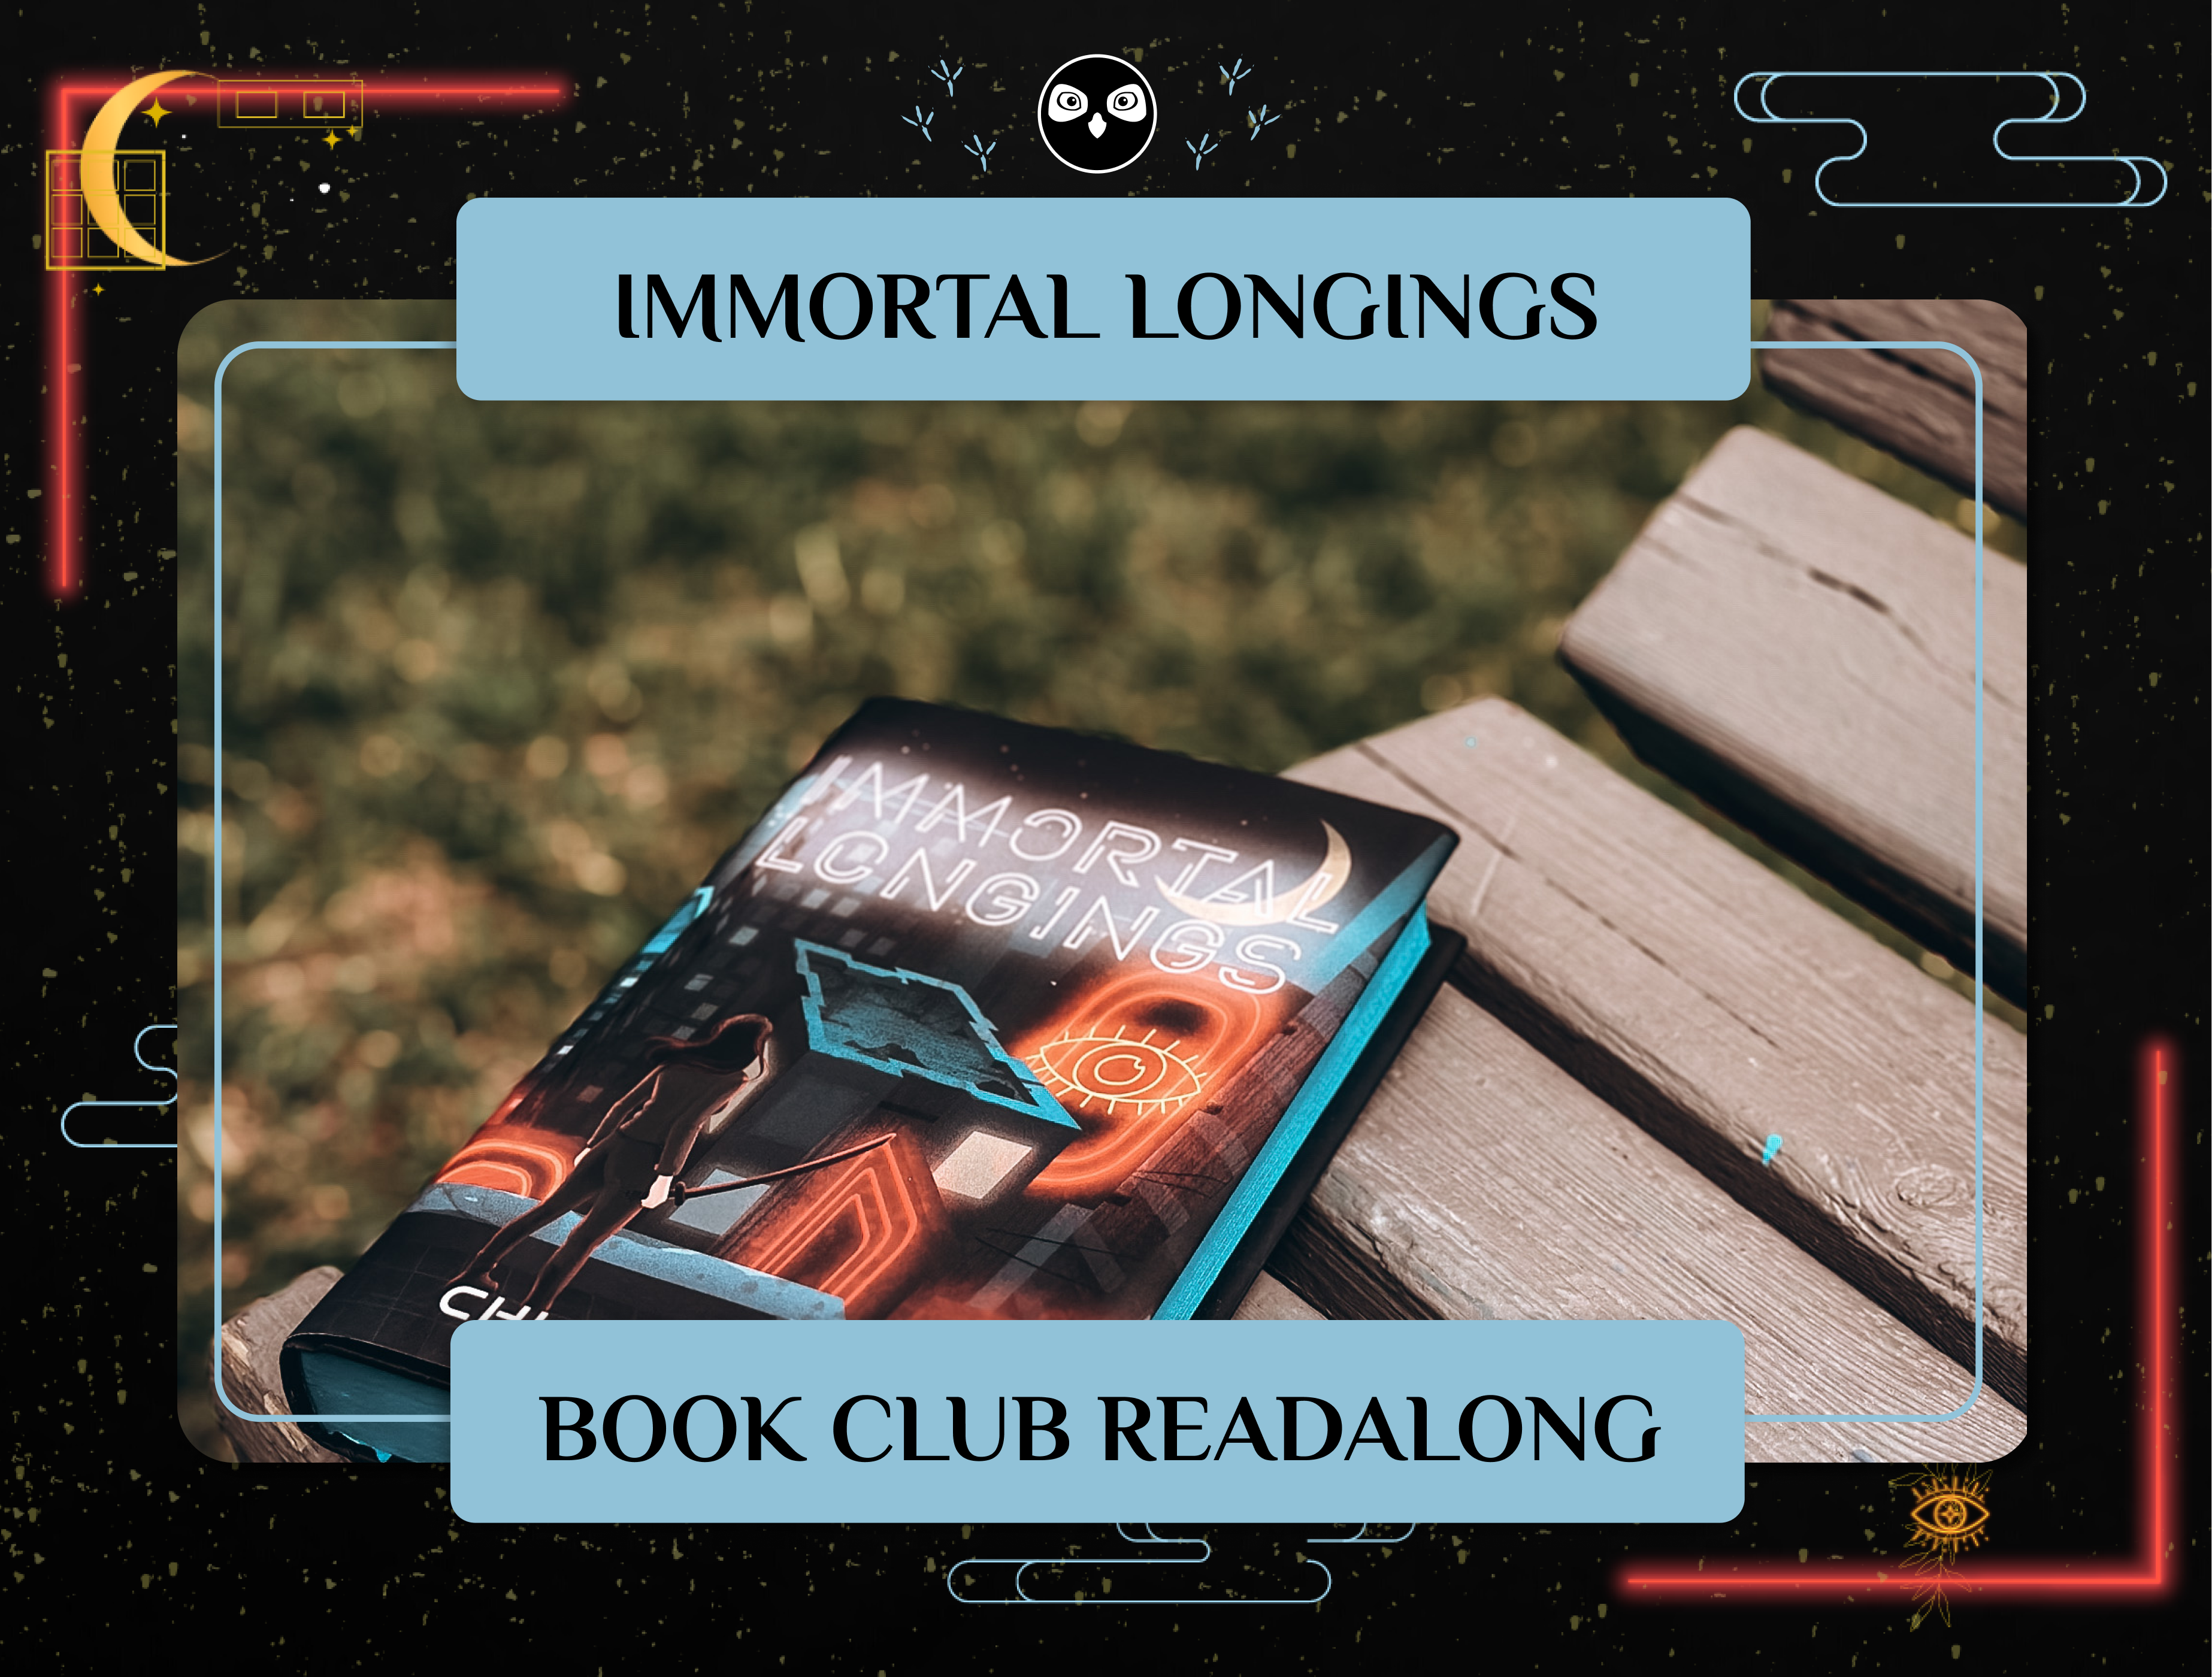 Immortal Longings Owlcrate by Chloe Gong, Hardcover